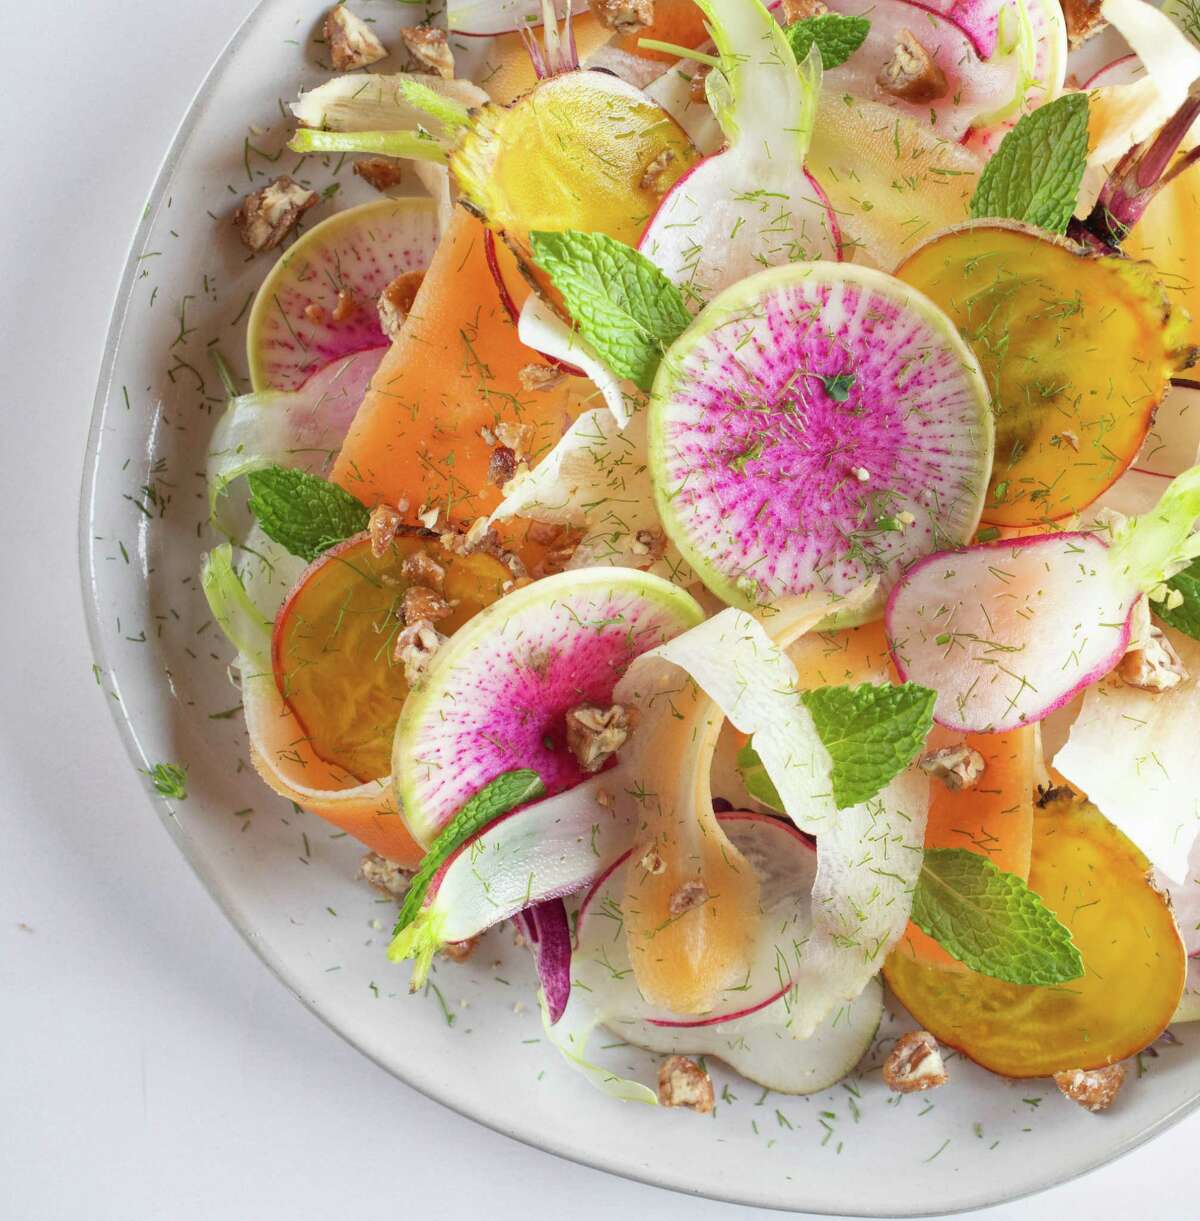 Shaved Radish Salad and Turmeric Vinaigrette from "How Good Food Works from Seed to Plate," a new cookbook from the Nourish program at UTHealth School of Public Health - Houston.